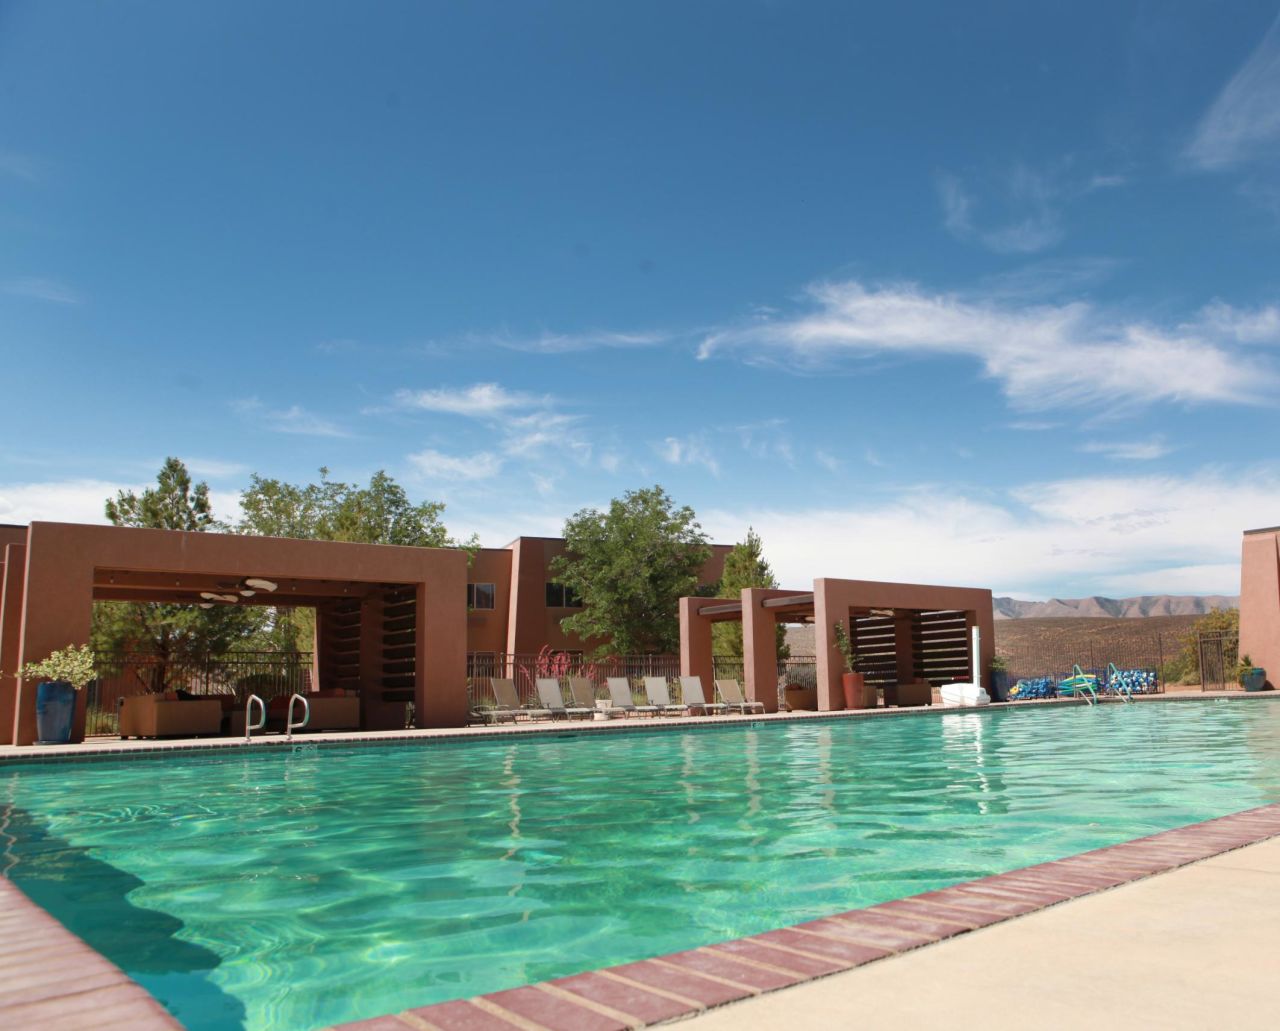 Movara Fitness Resort in Ivins, Utah, was recently sold out 18 weeks in a row.